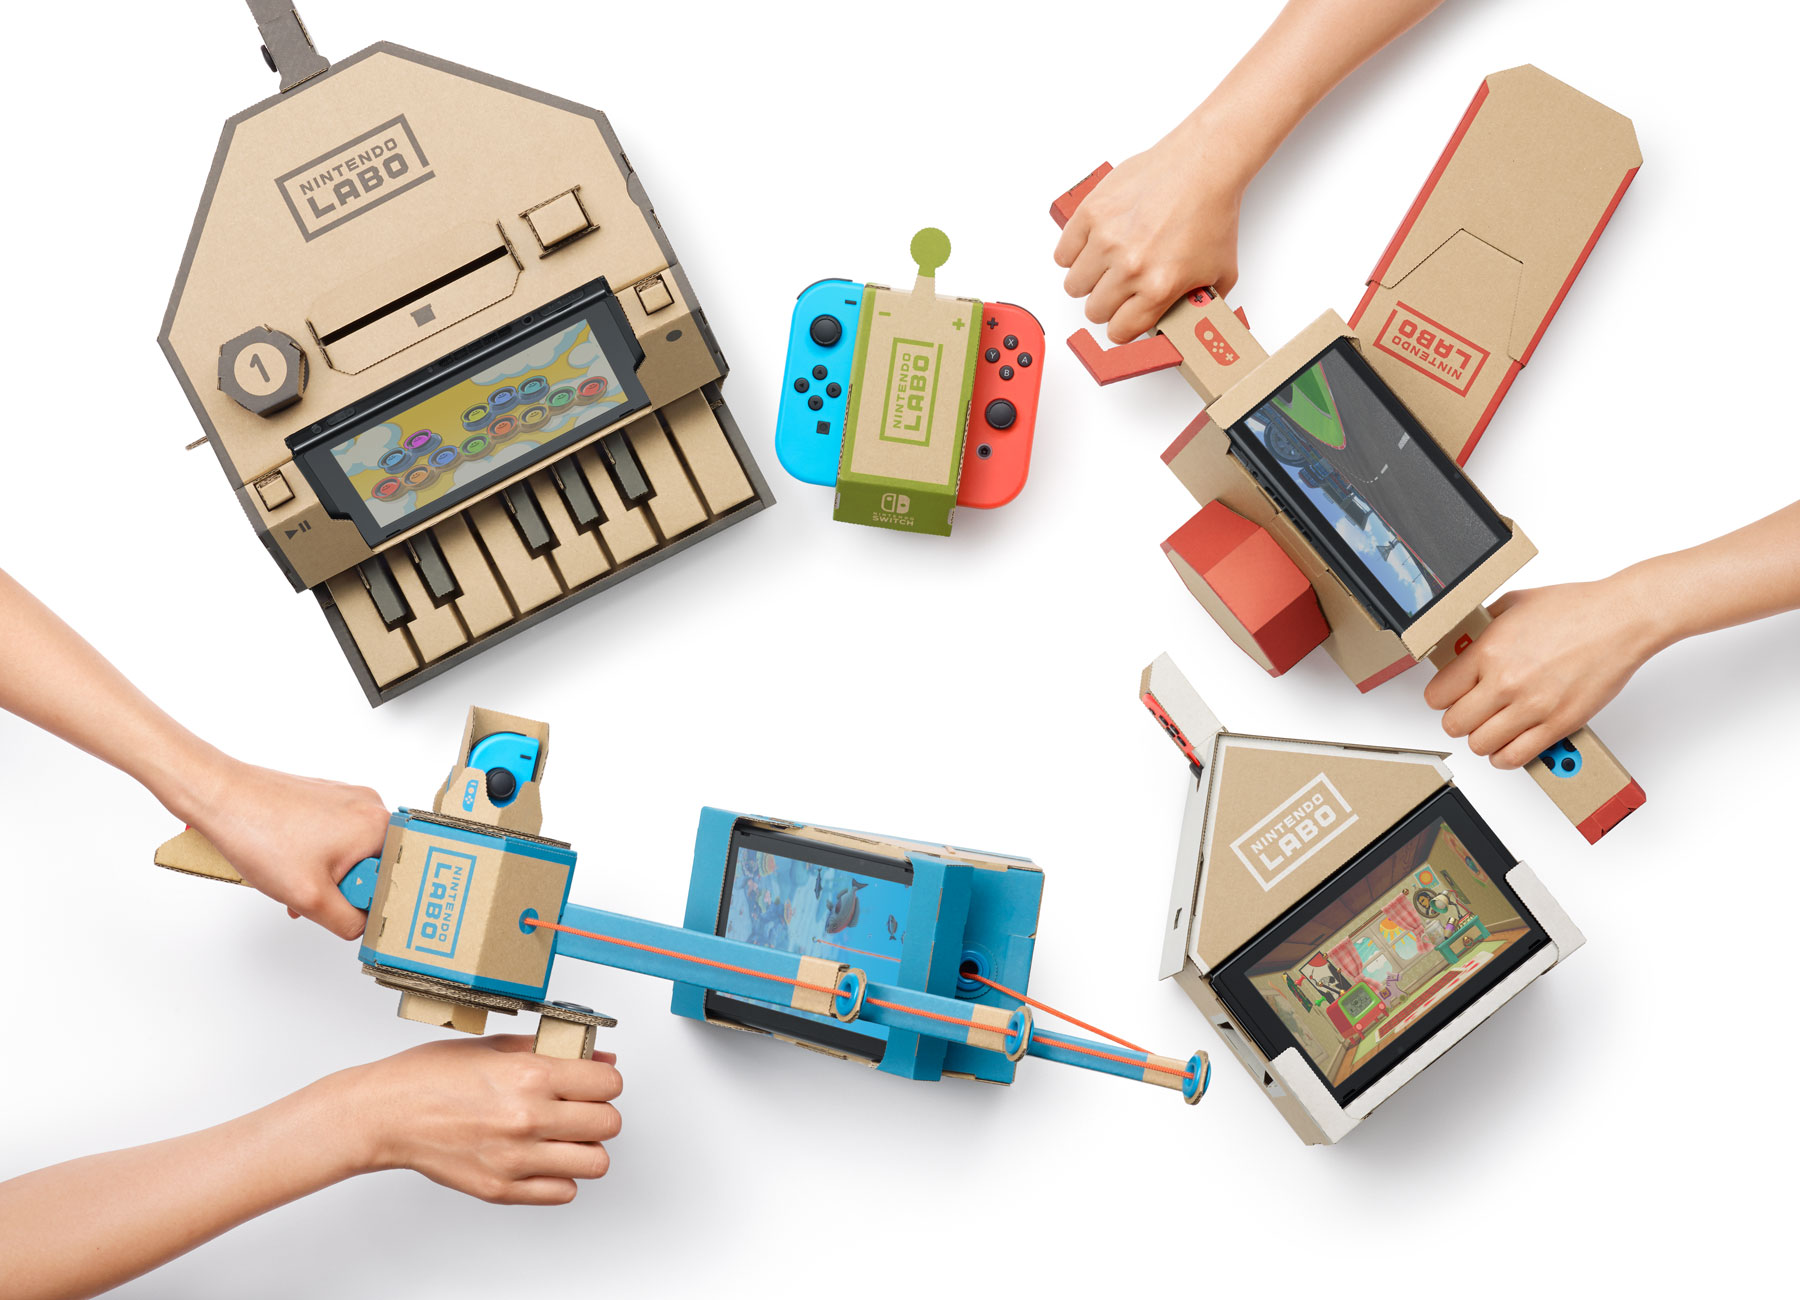 Nintendo Surprises With Cardboard Accessories for Switch - Bloomberg